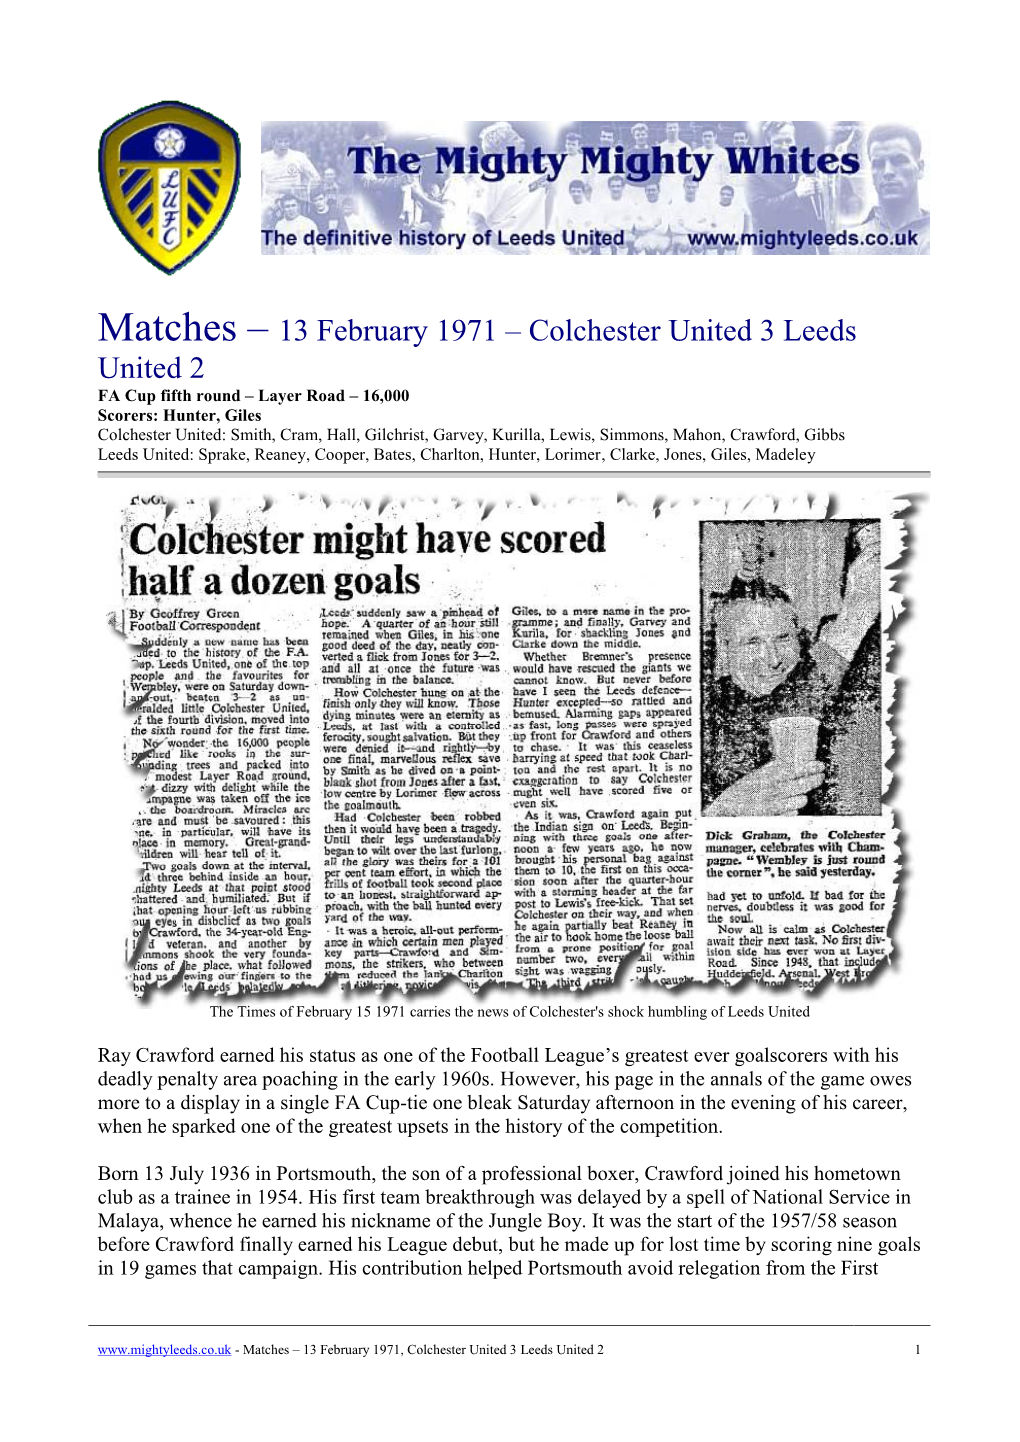 Matches – 13 February 1971 – Colchester United 3 Leeds United 2